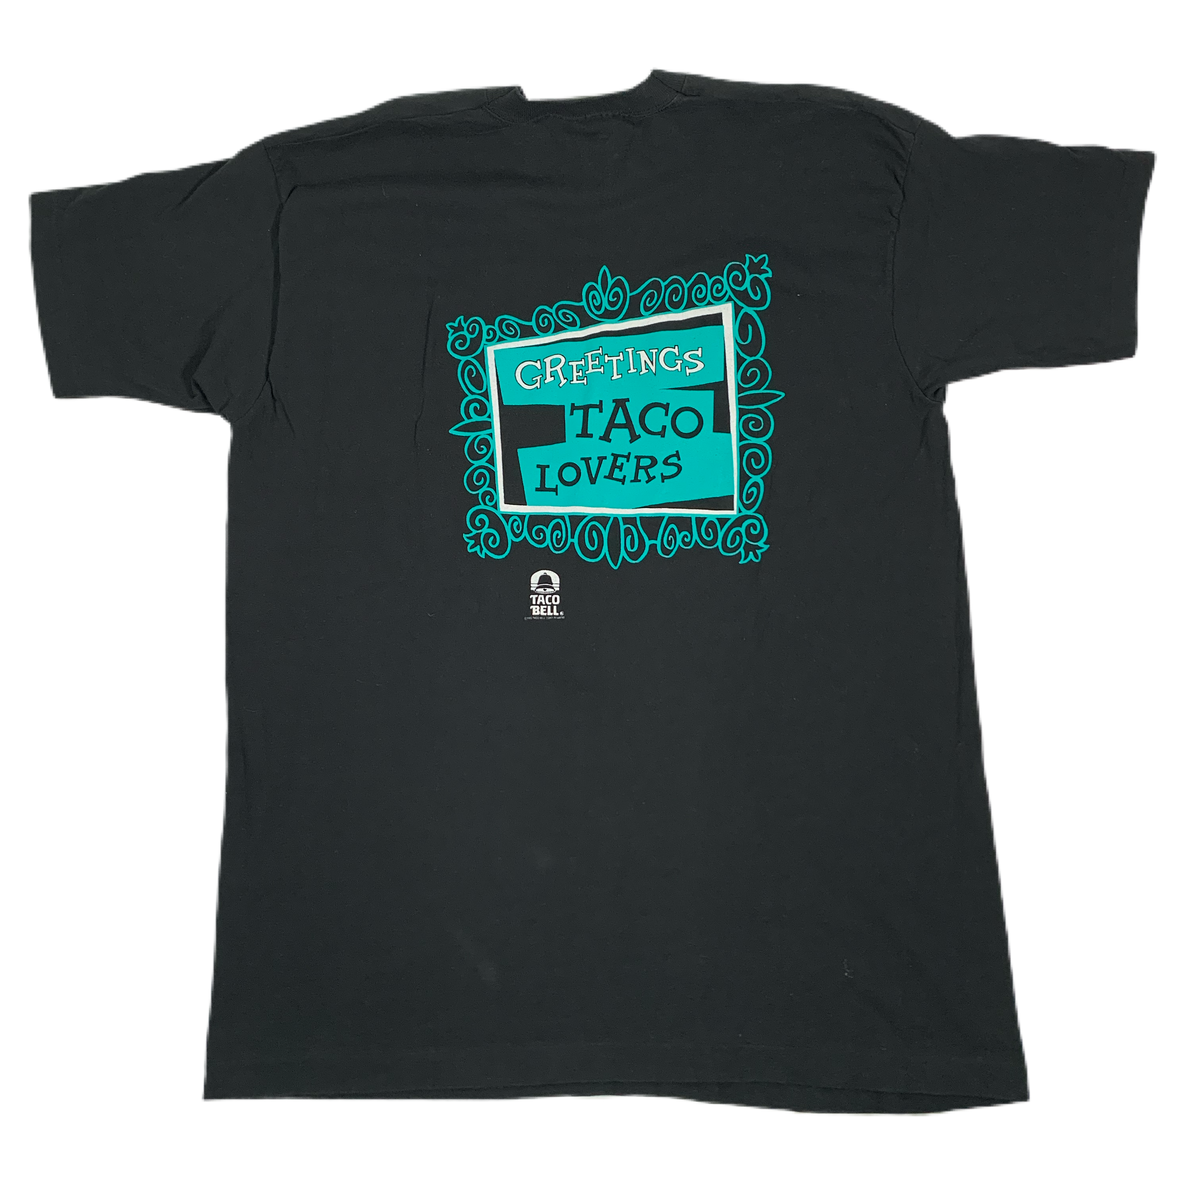 Vintage Rocky And Bullwinkle “Taco Bell” T-Shirt - jointcustodydc